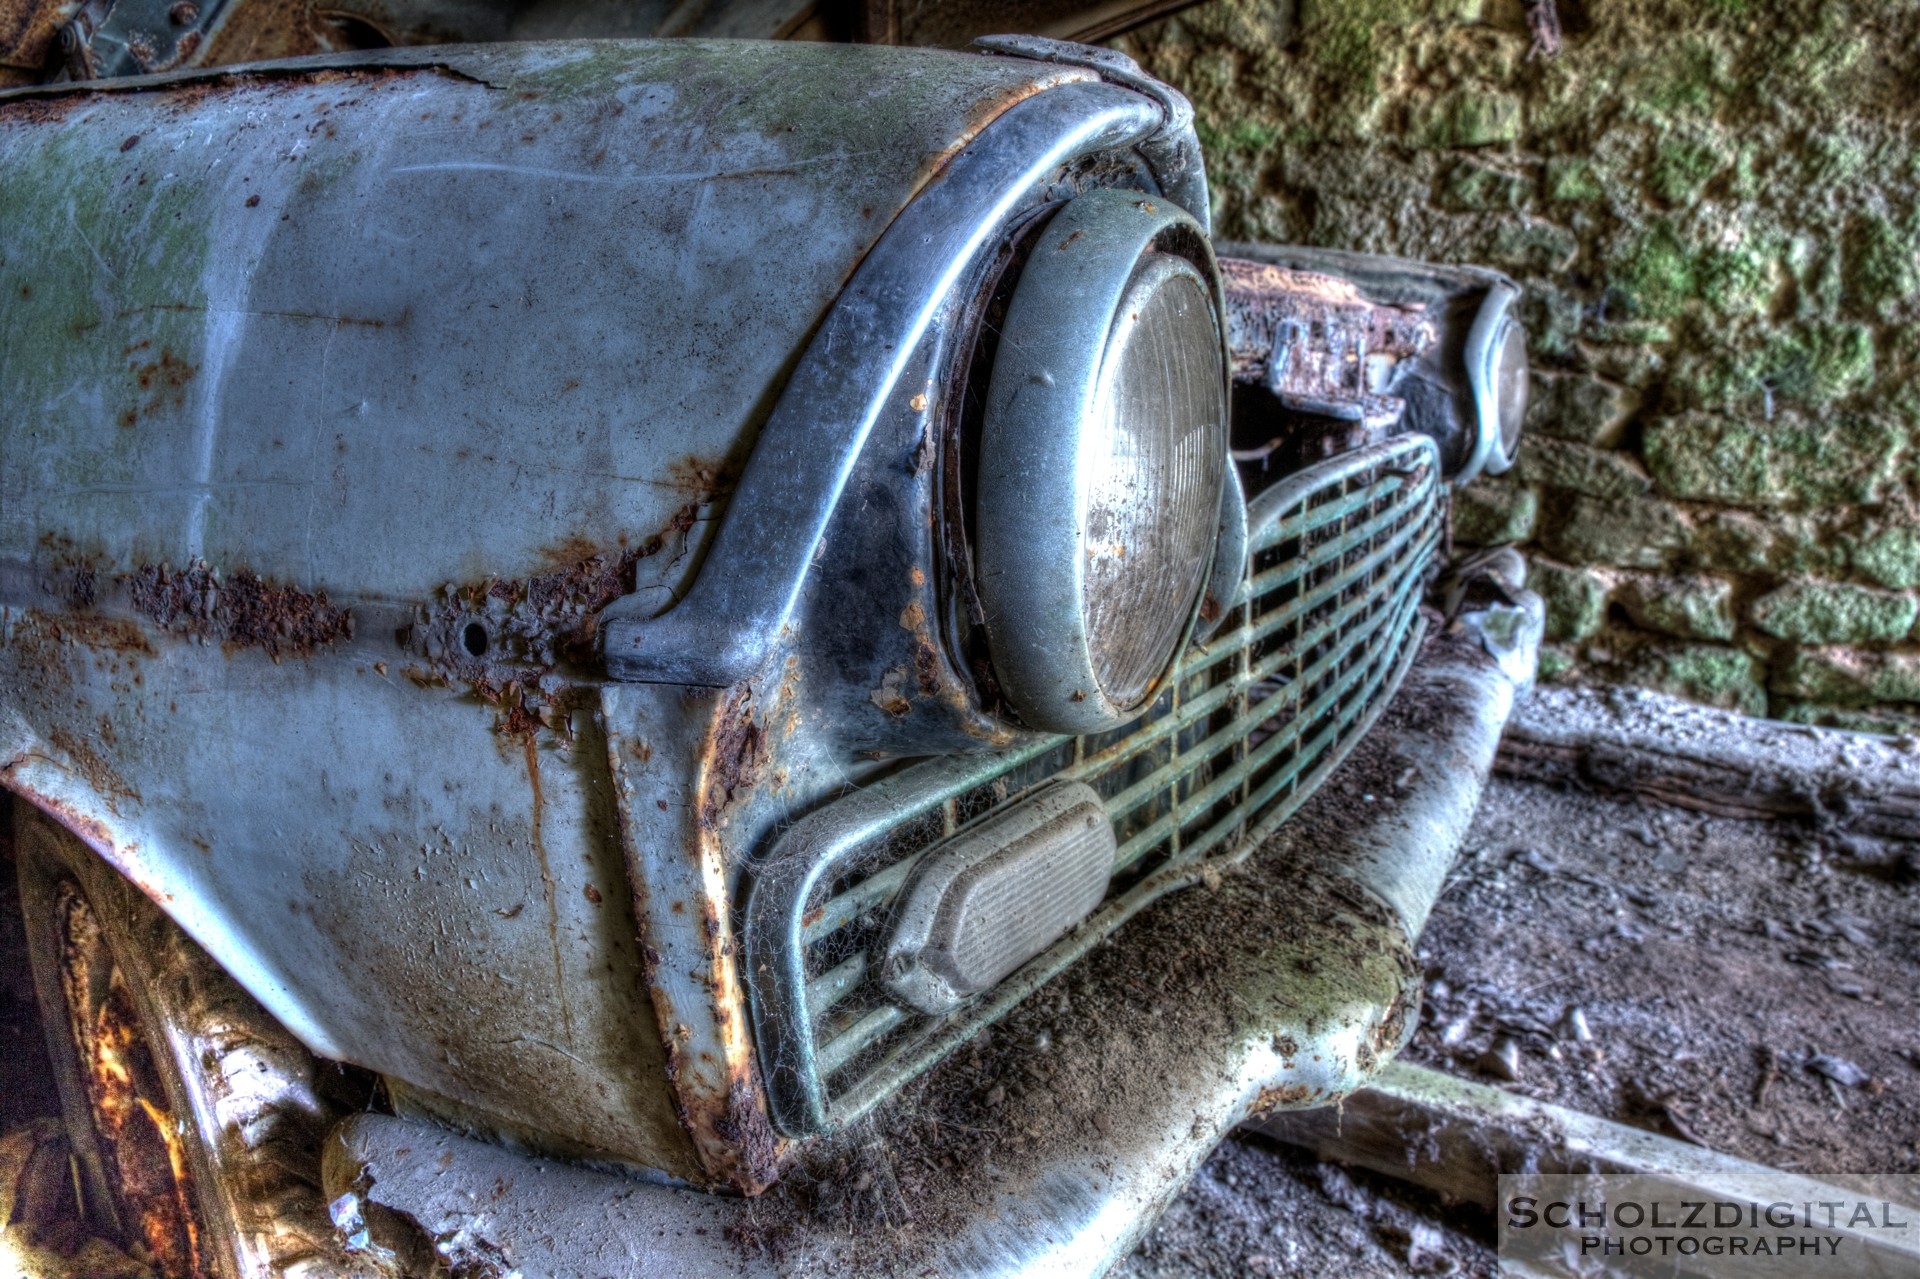 Lost Place - Oldtimer